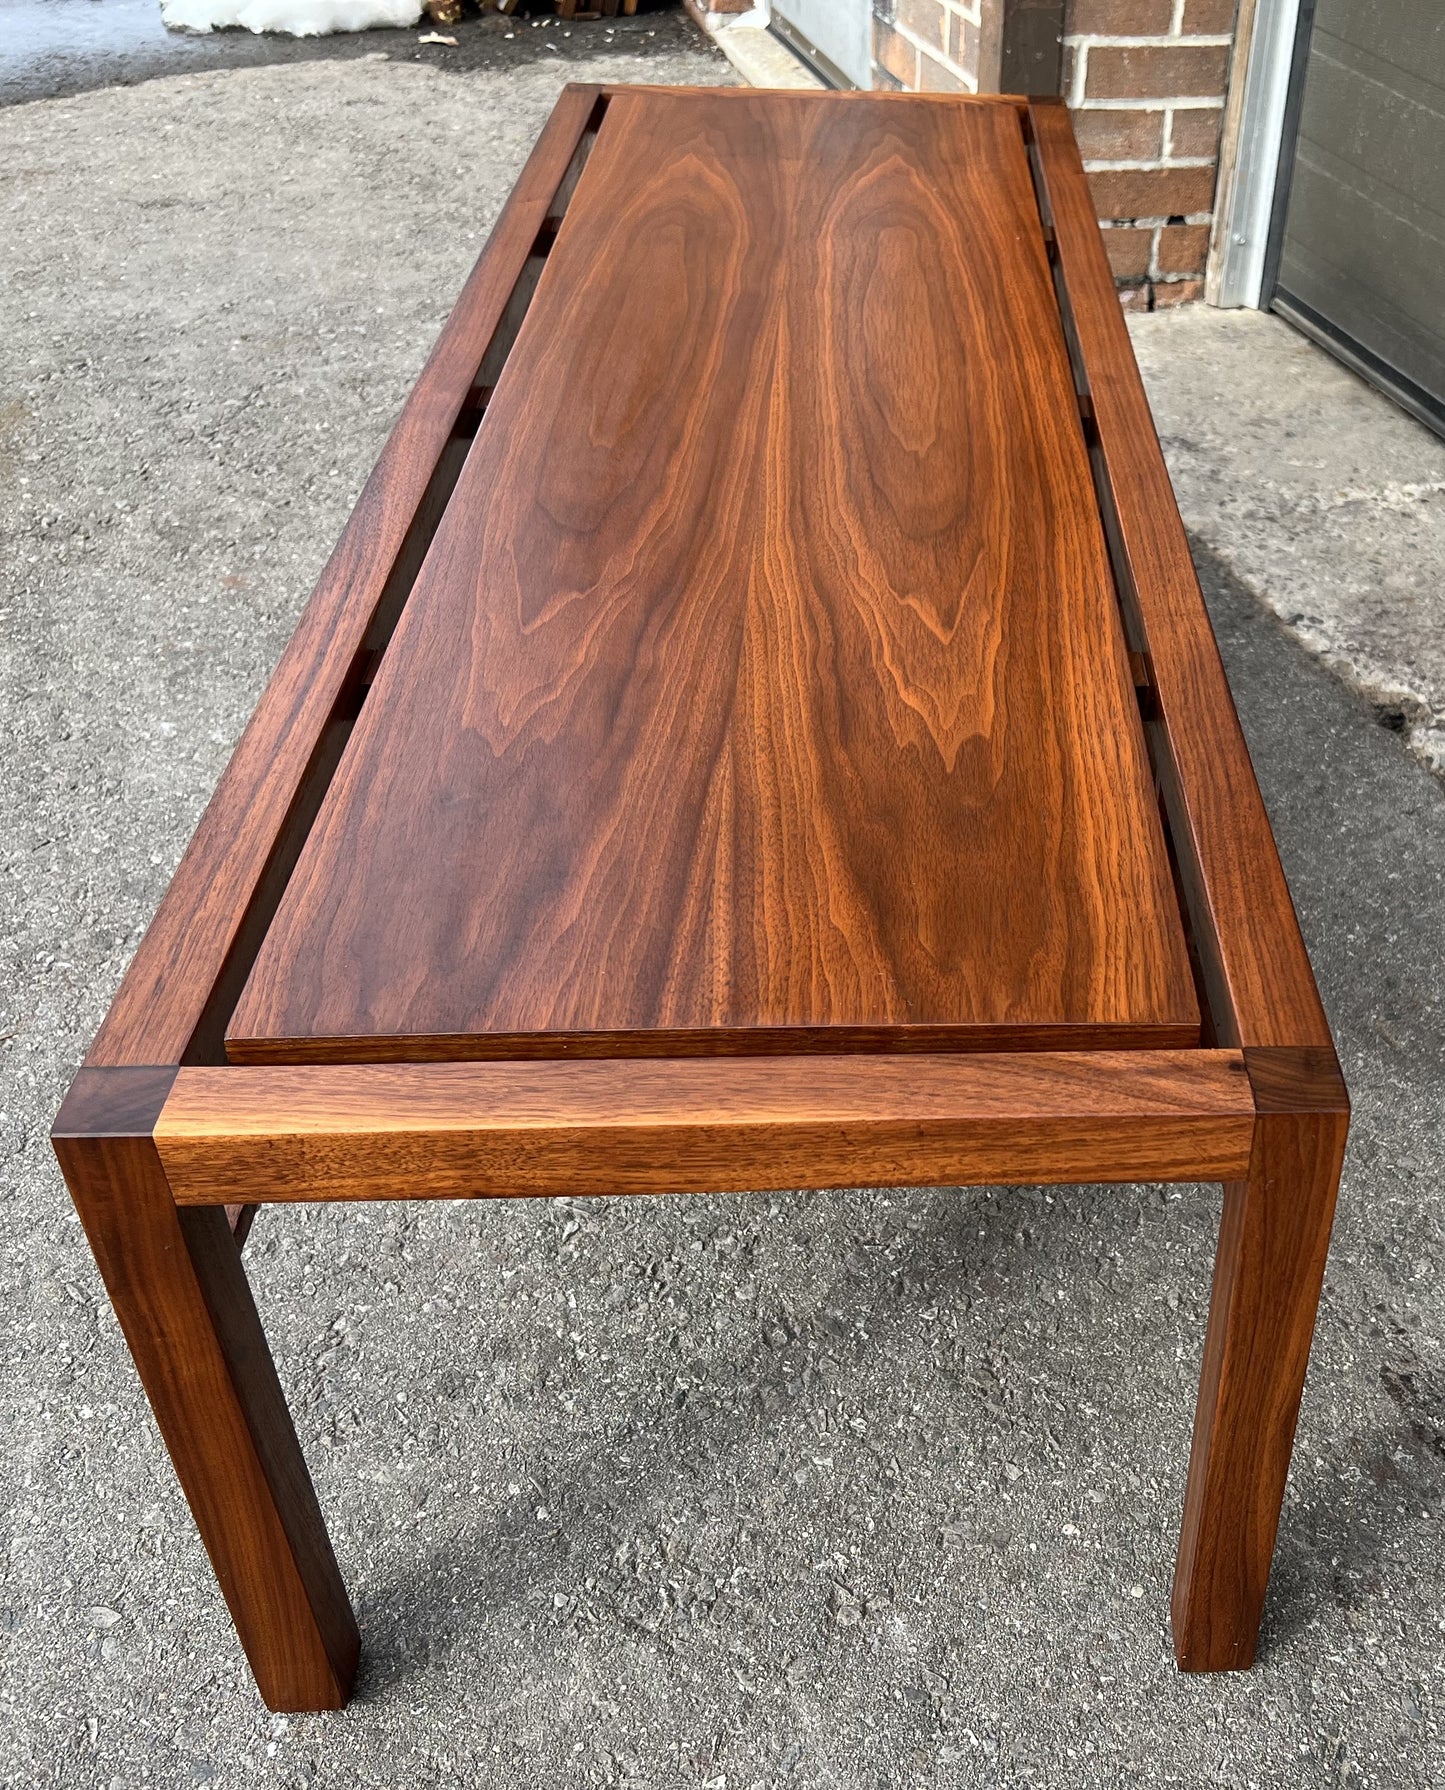 REFINISHED Mid Century Modern Walnut Coffee Table, Floating Top